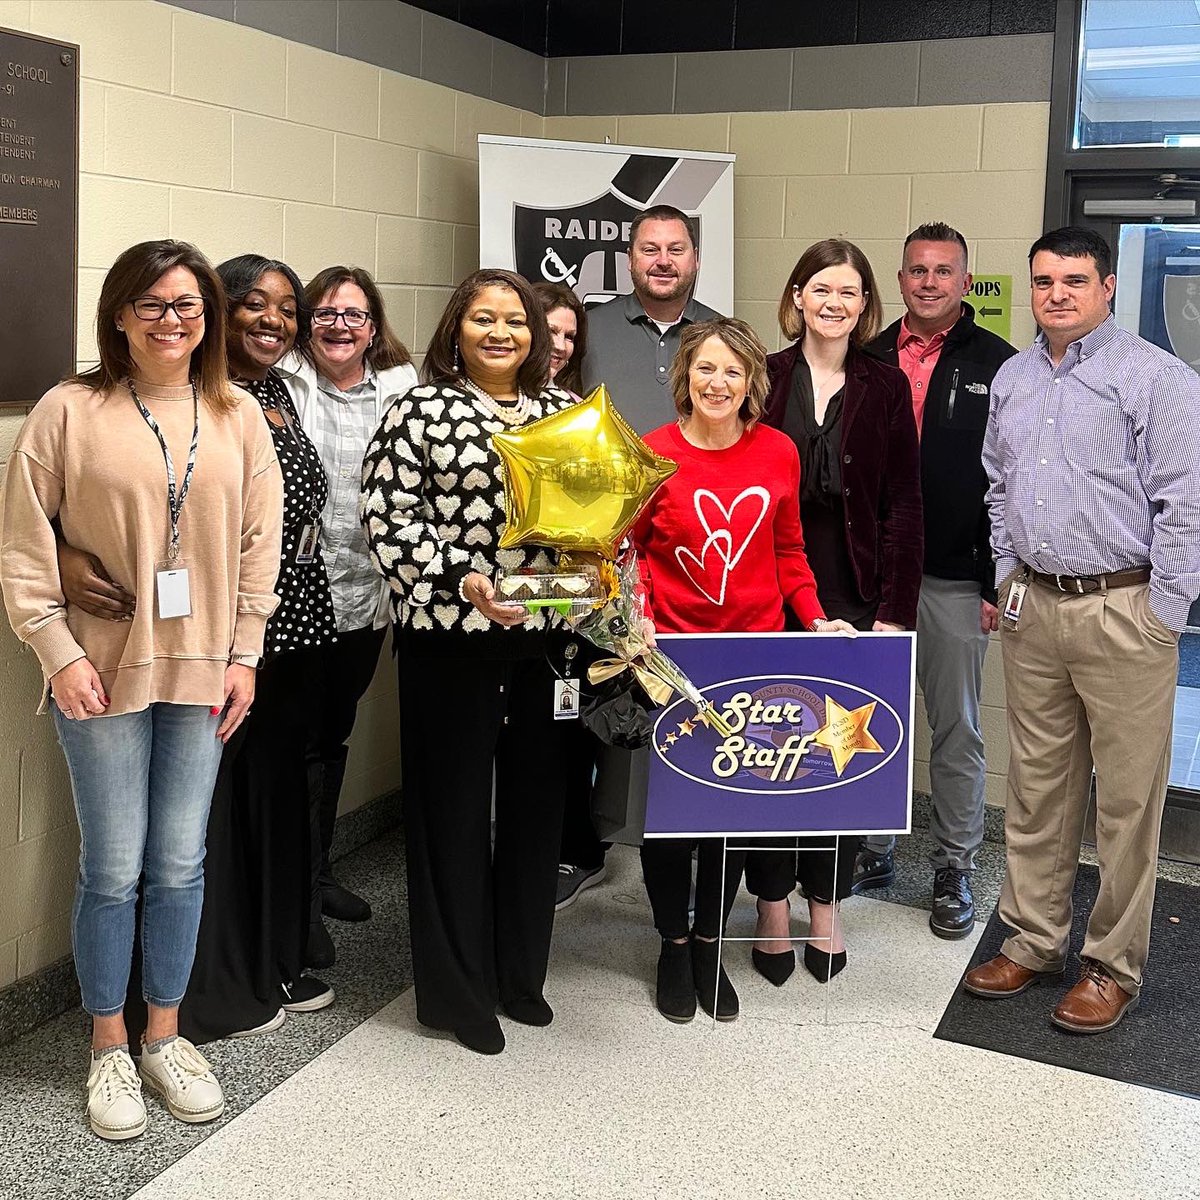 Congratulations to our very own Mrs. Heppner for winning the Star Staff Award! She has been at East Paulding High School since its opening and we appreciate her contributions every day! ⭐️